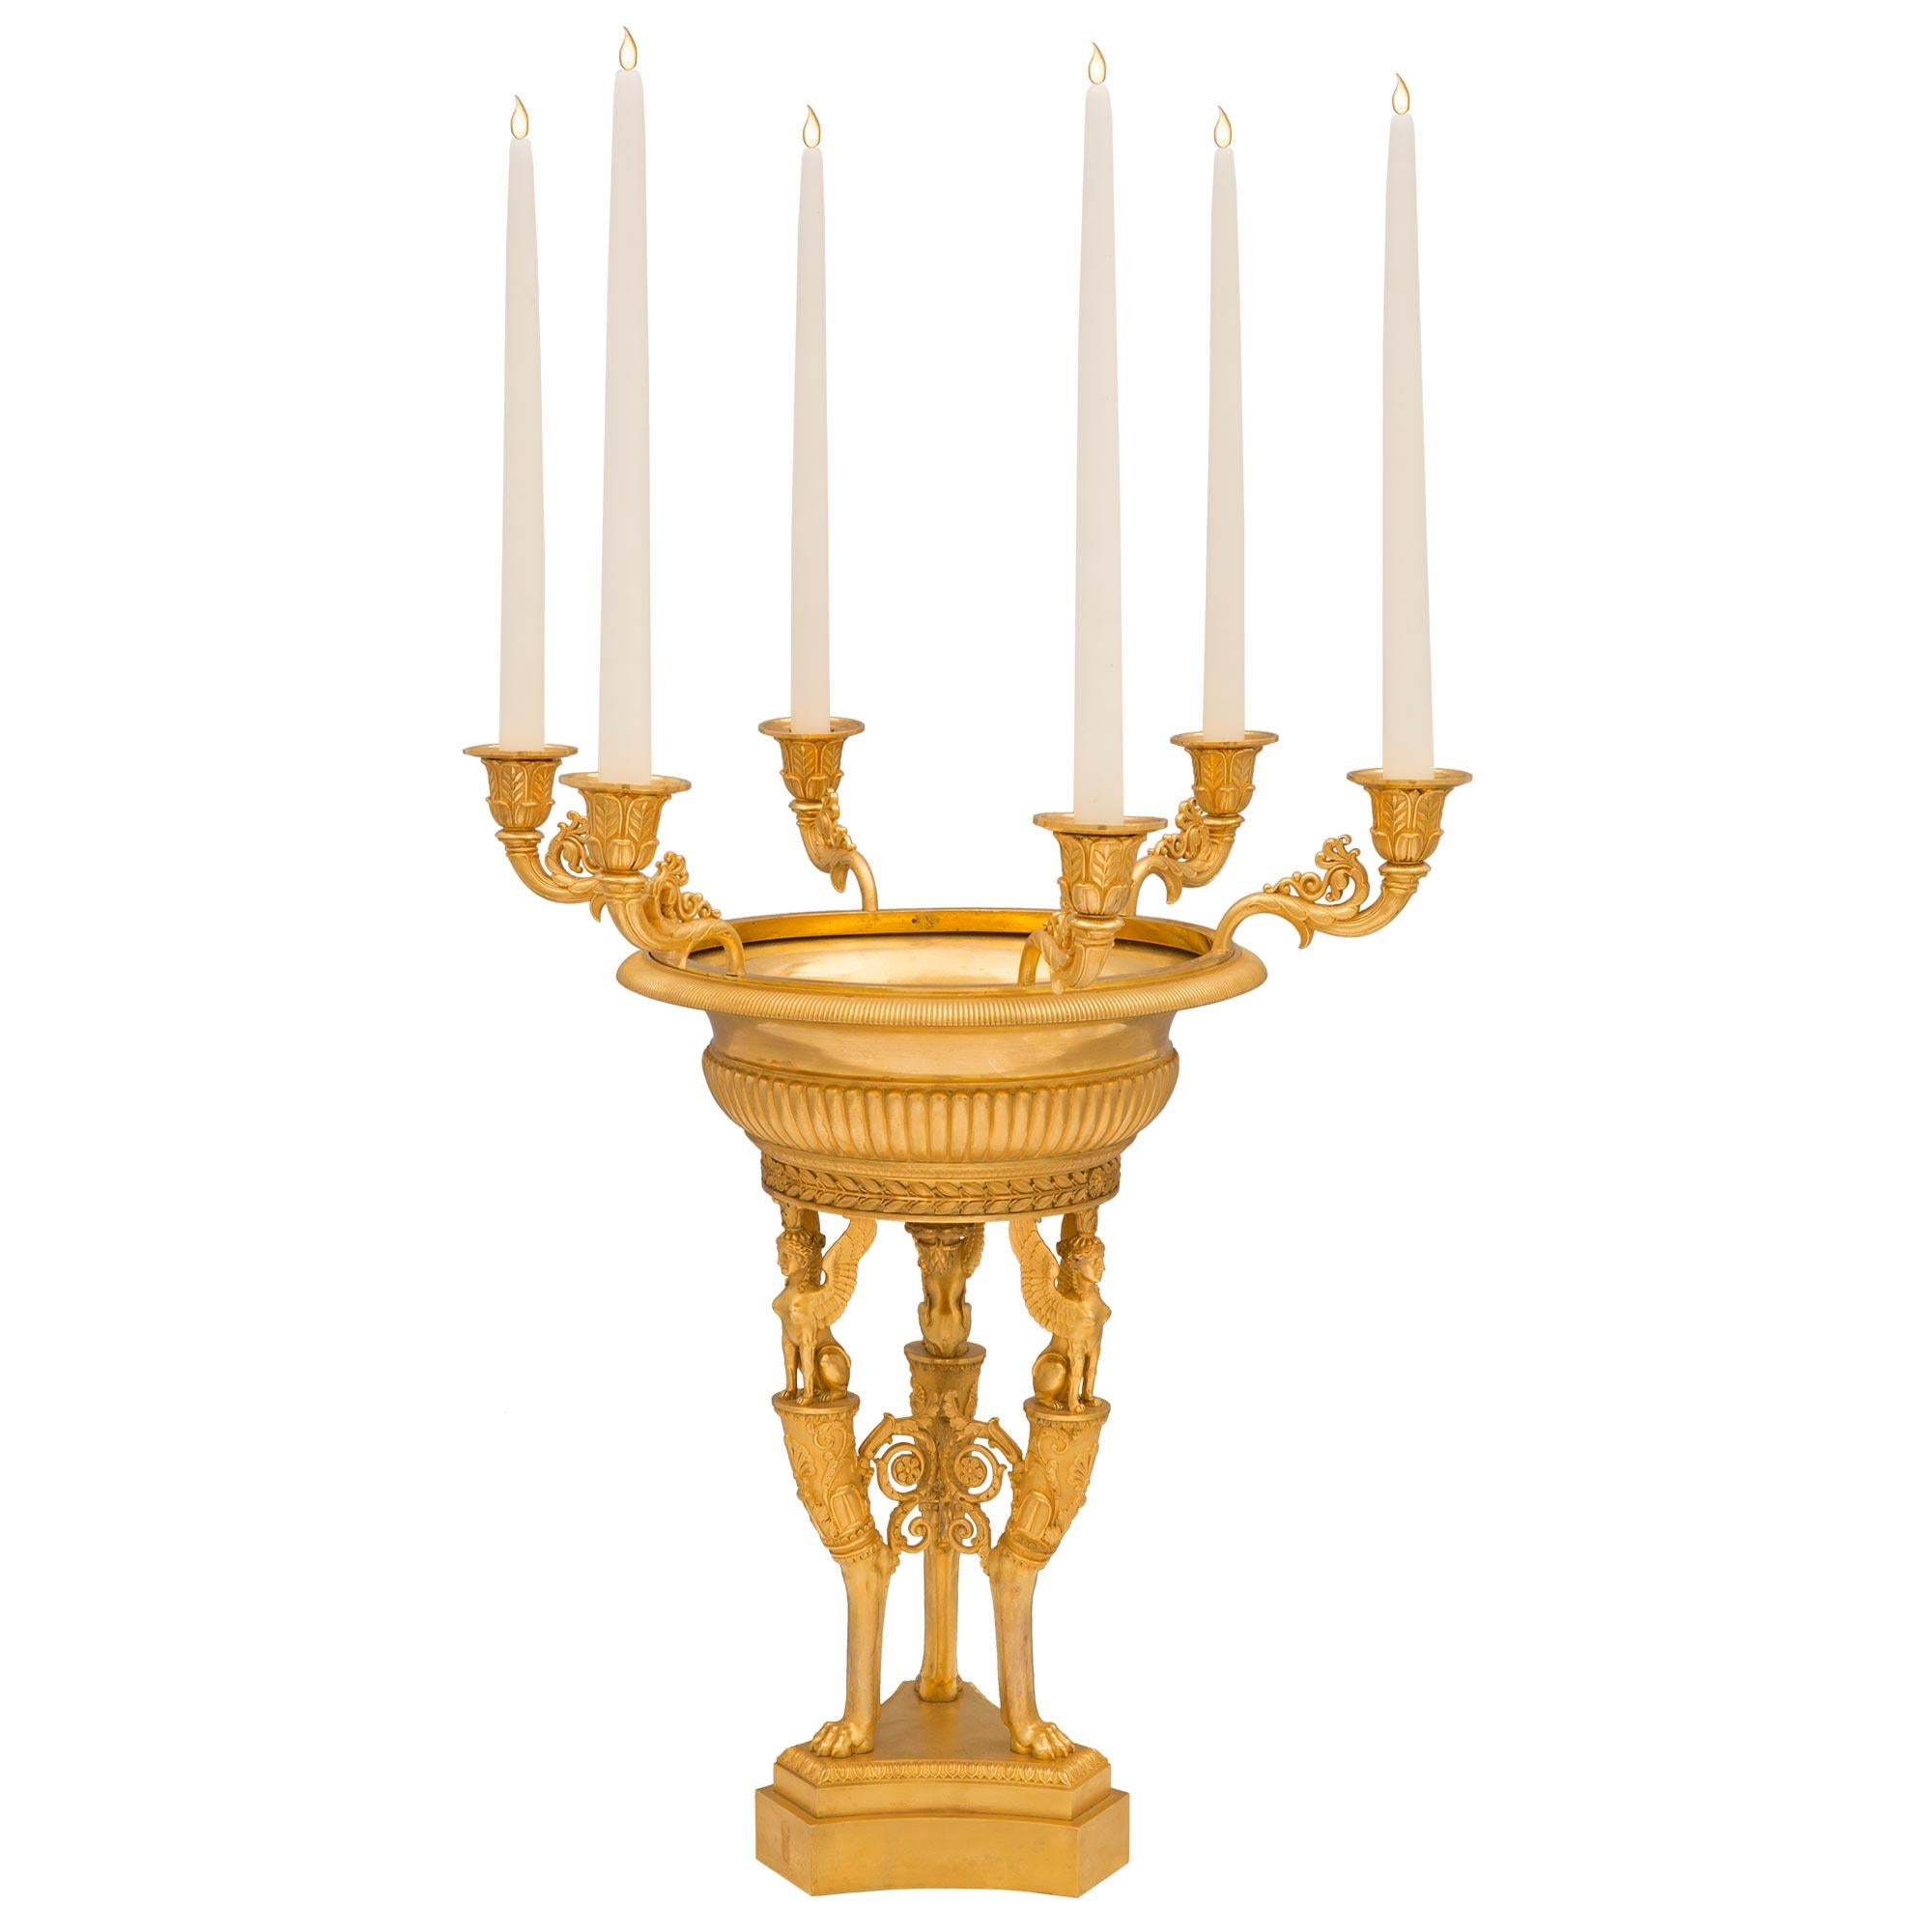 French 19th Century 1st Empire Period Ormolu Candelabra Centerpiece In Good Condition For Sale In West Palm Beach, FL